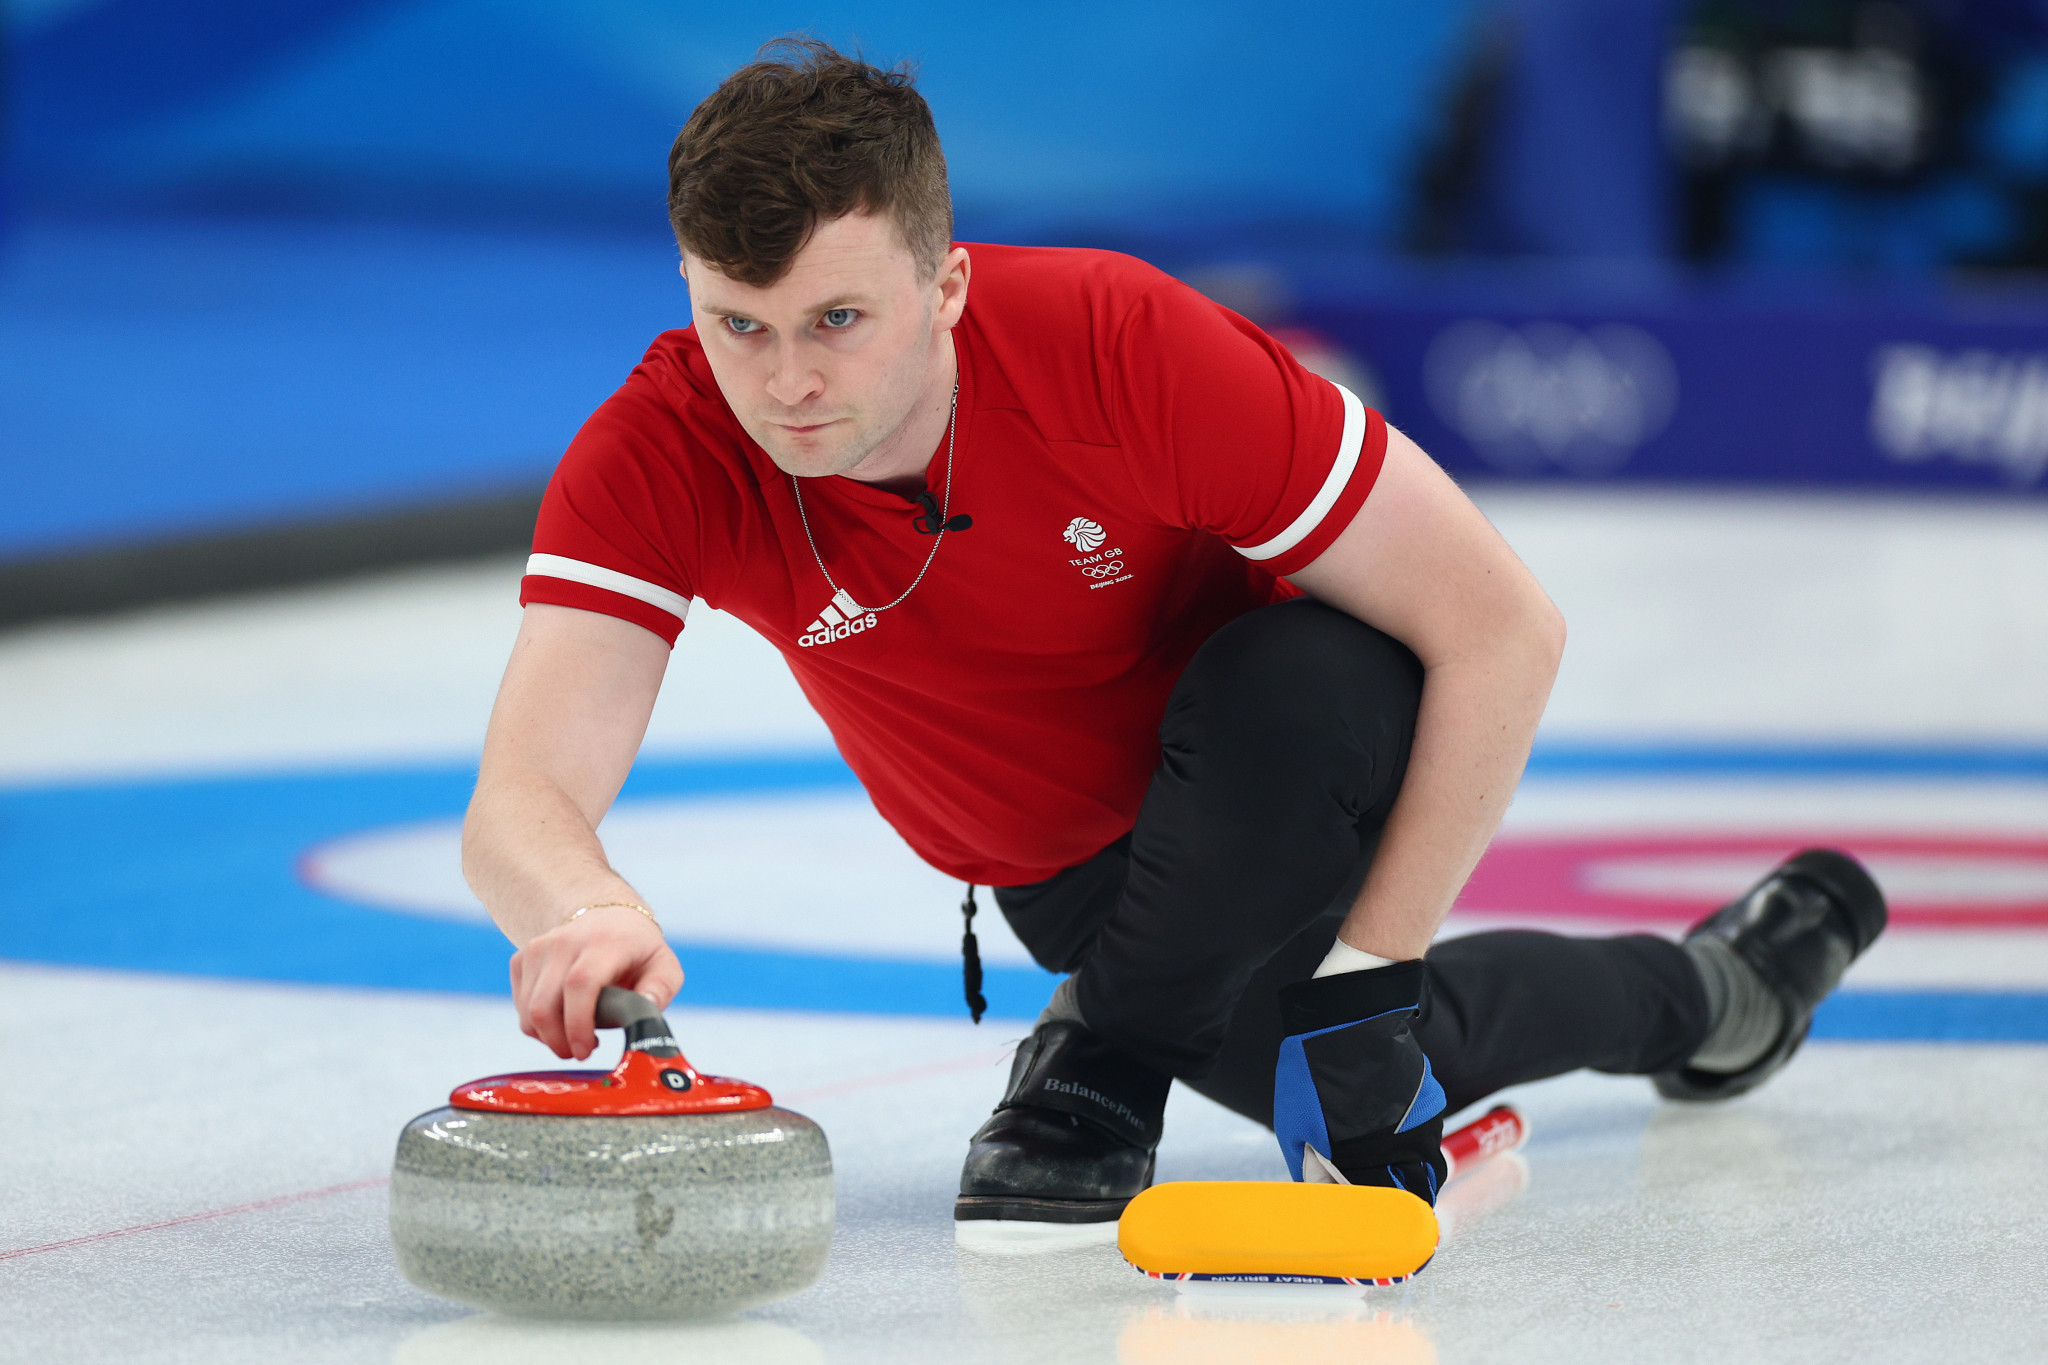 Bruce Mouat's Britain narrowly lost to Sweden in the men's curling final at Beijing 2022 ©Getty Images